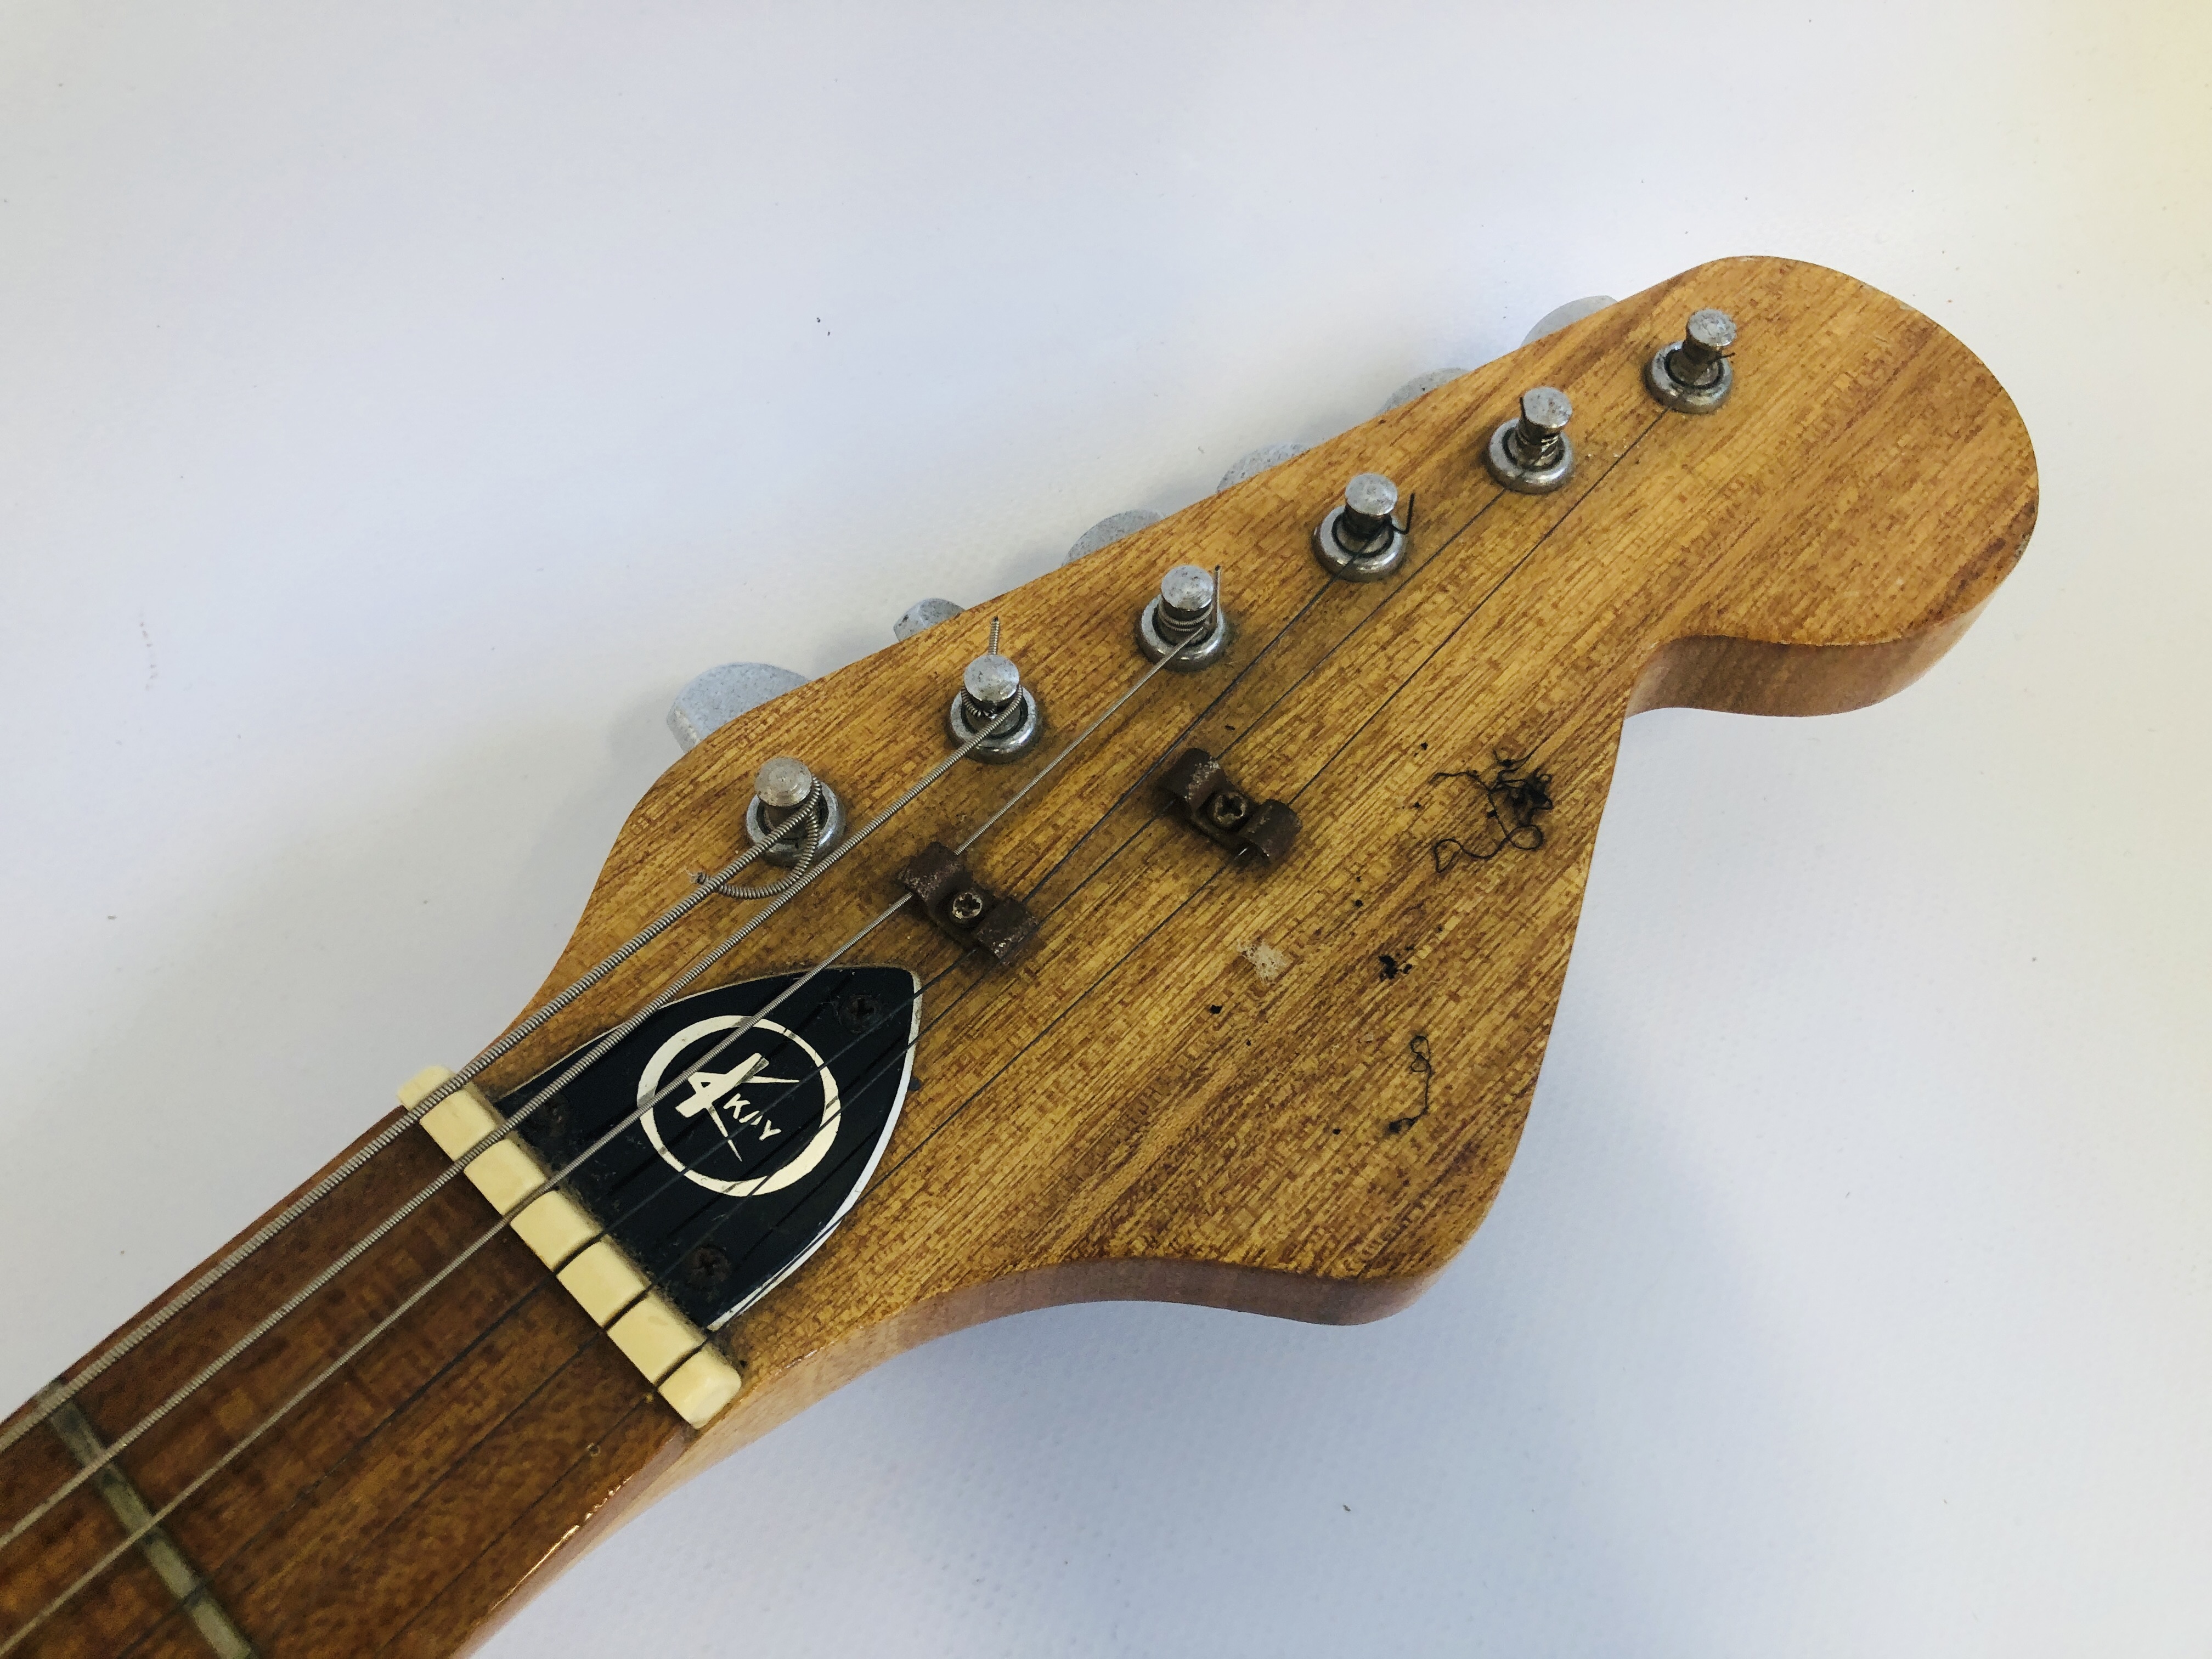 A KAY ELECTRIC GUITAR IN WOOD LAMINATE FINISH ALONG WITH TRAVEL CASE (A/F) - Image 5 of 12